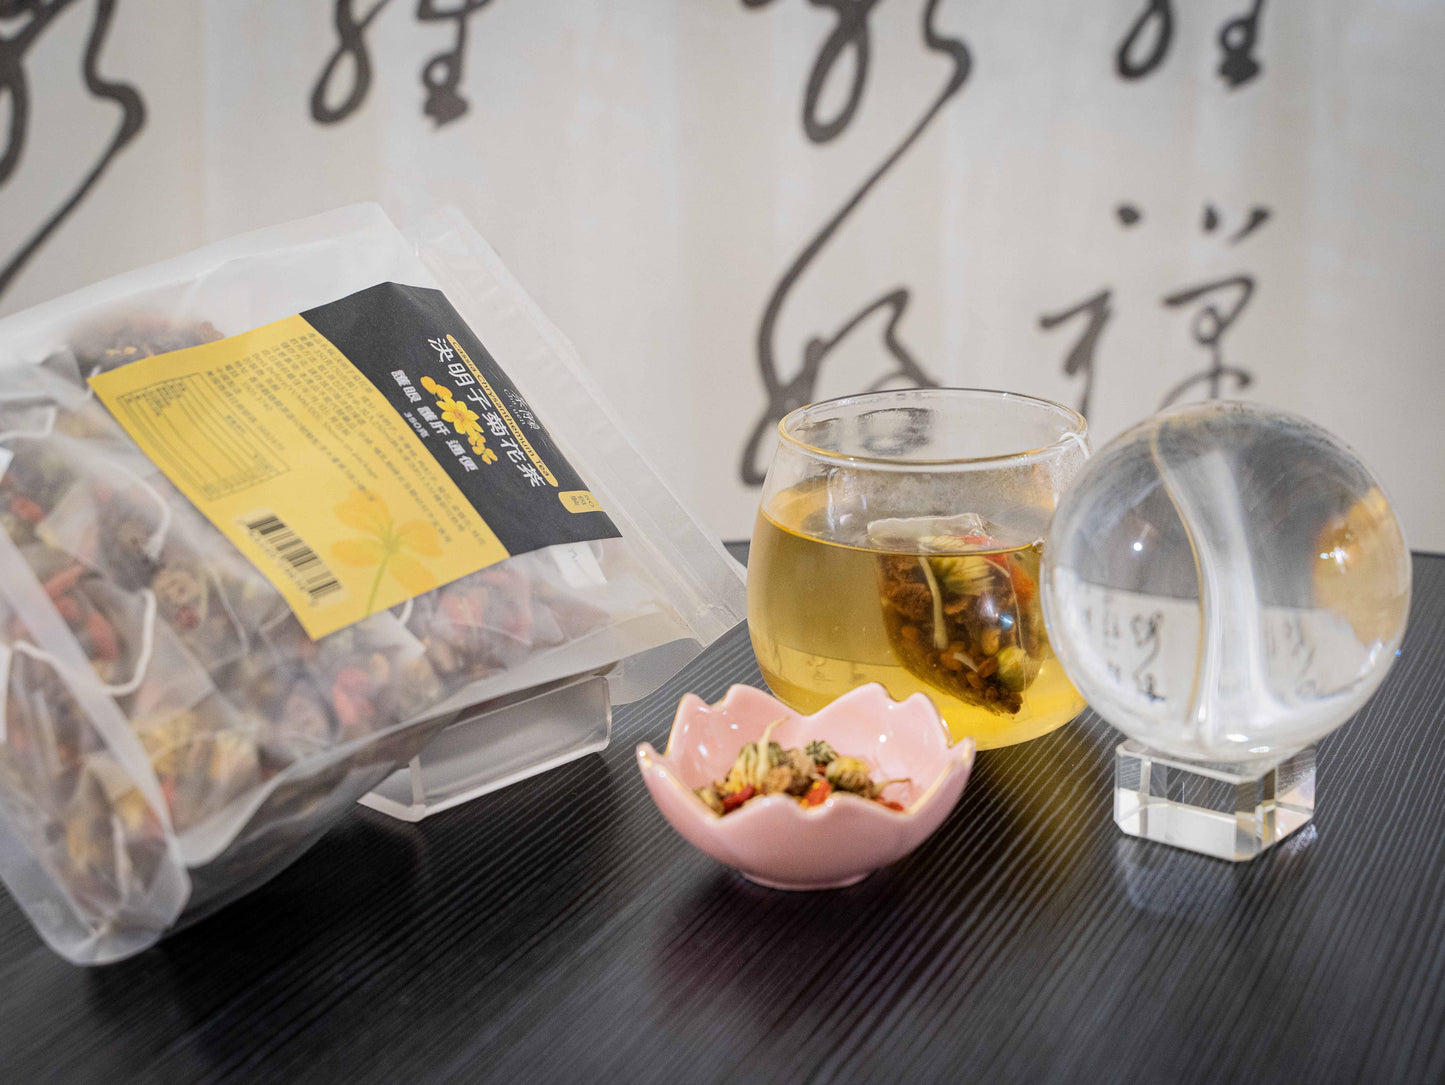 Cha Yuen – 50pcs Cassia Chrysanthemum Tea Eyes-Caring Herbal Tea Bags Protect eyes & liver and Help defecation smooth